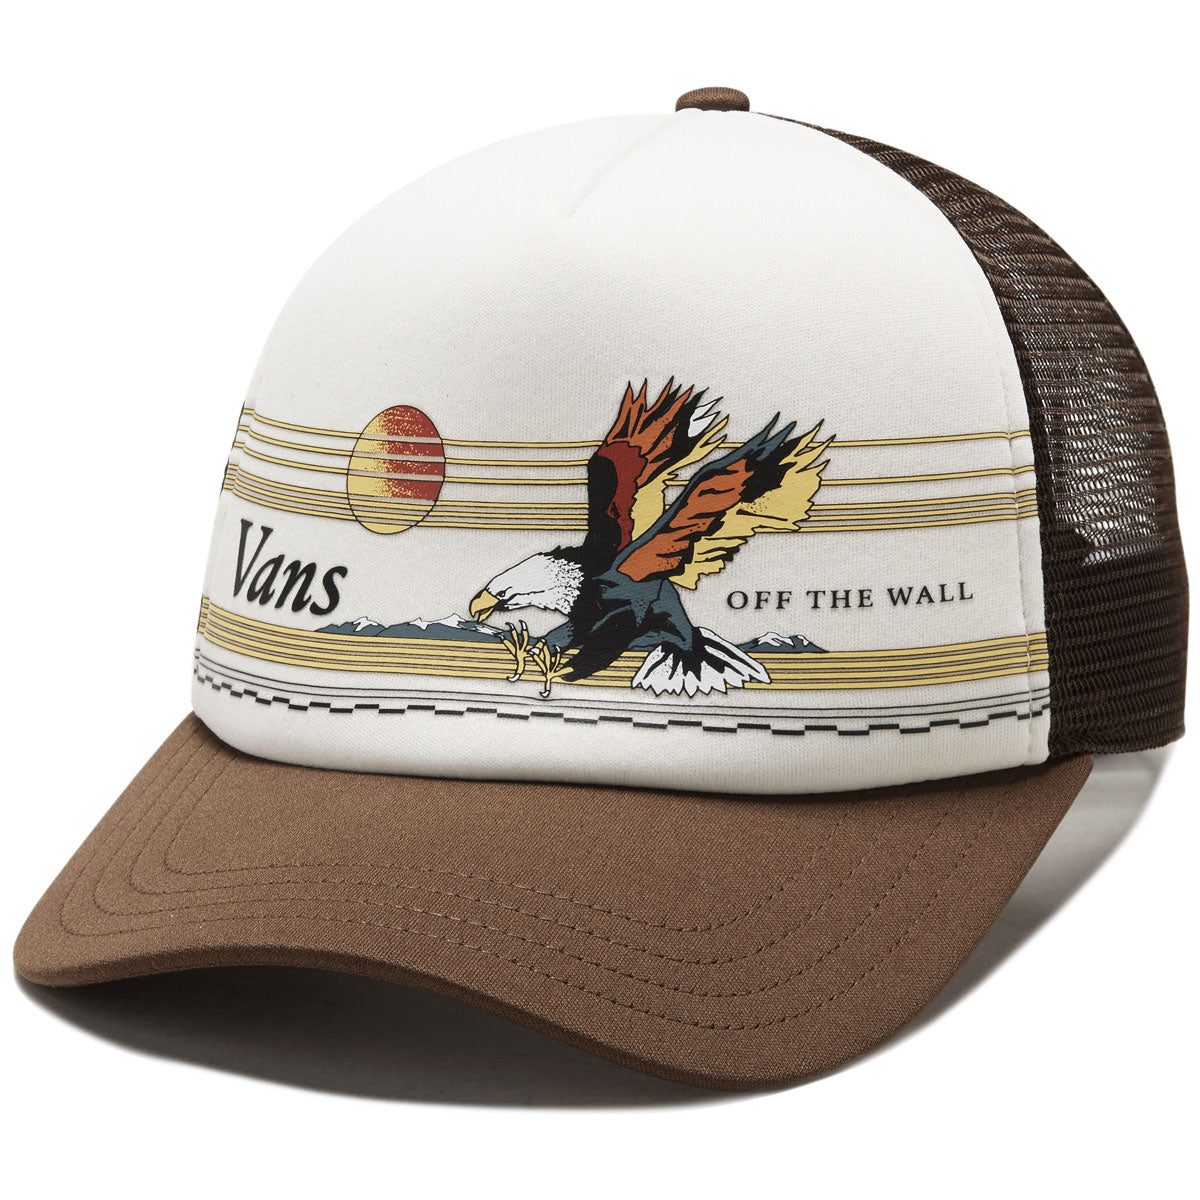 Vans Classic Curved Bill Trucker Hat - Sepia image 1